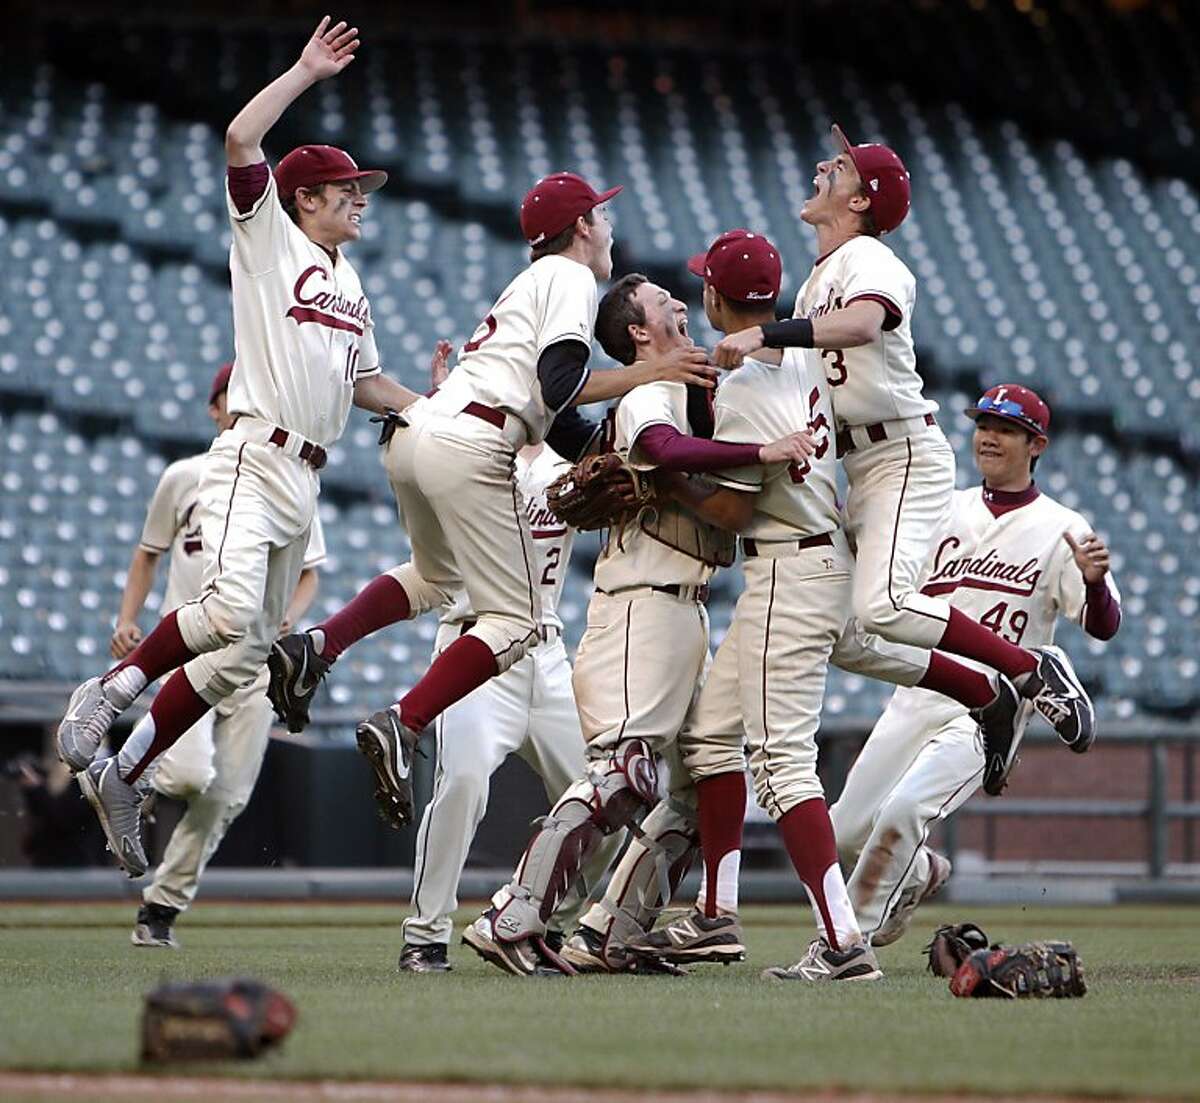 The Lowell Cardinals rush the field after they defeated the Washington Eagles on Wednesday. The Lowell High School Cardinals played the Washington High School Eagles in the San Francisco CIF Spring Championships at AT&T Park in San Francisco, Calif,. on Wednesday, May 8, 2013.